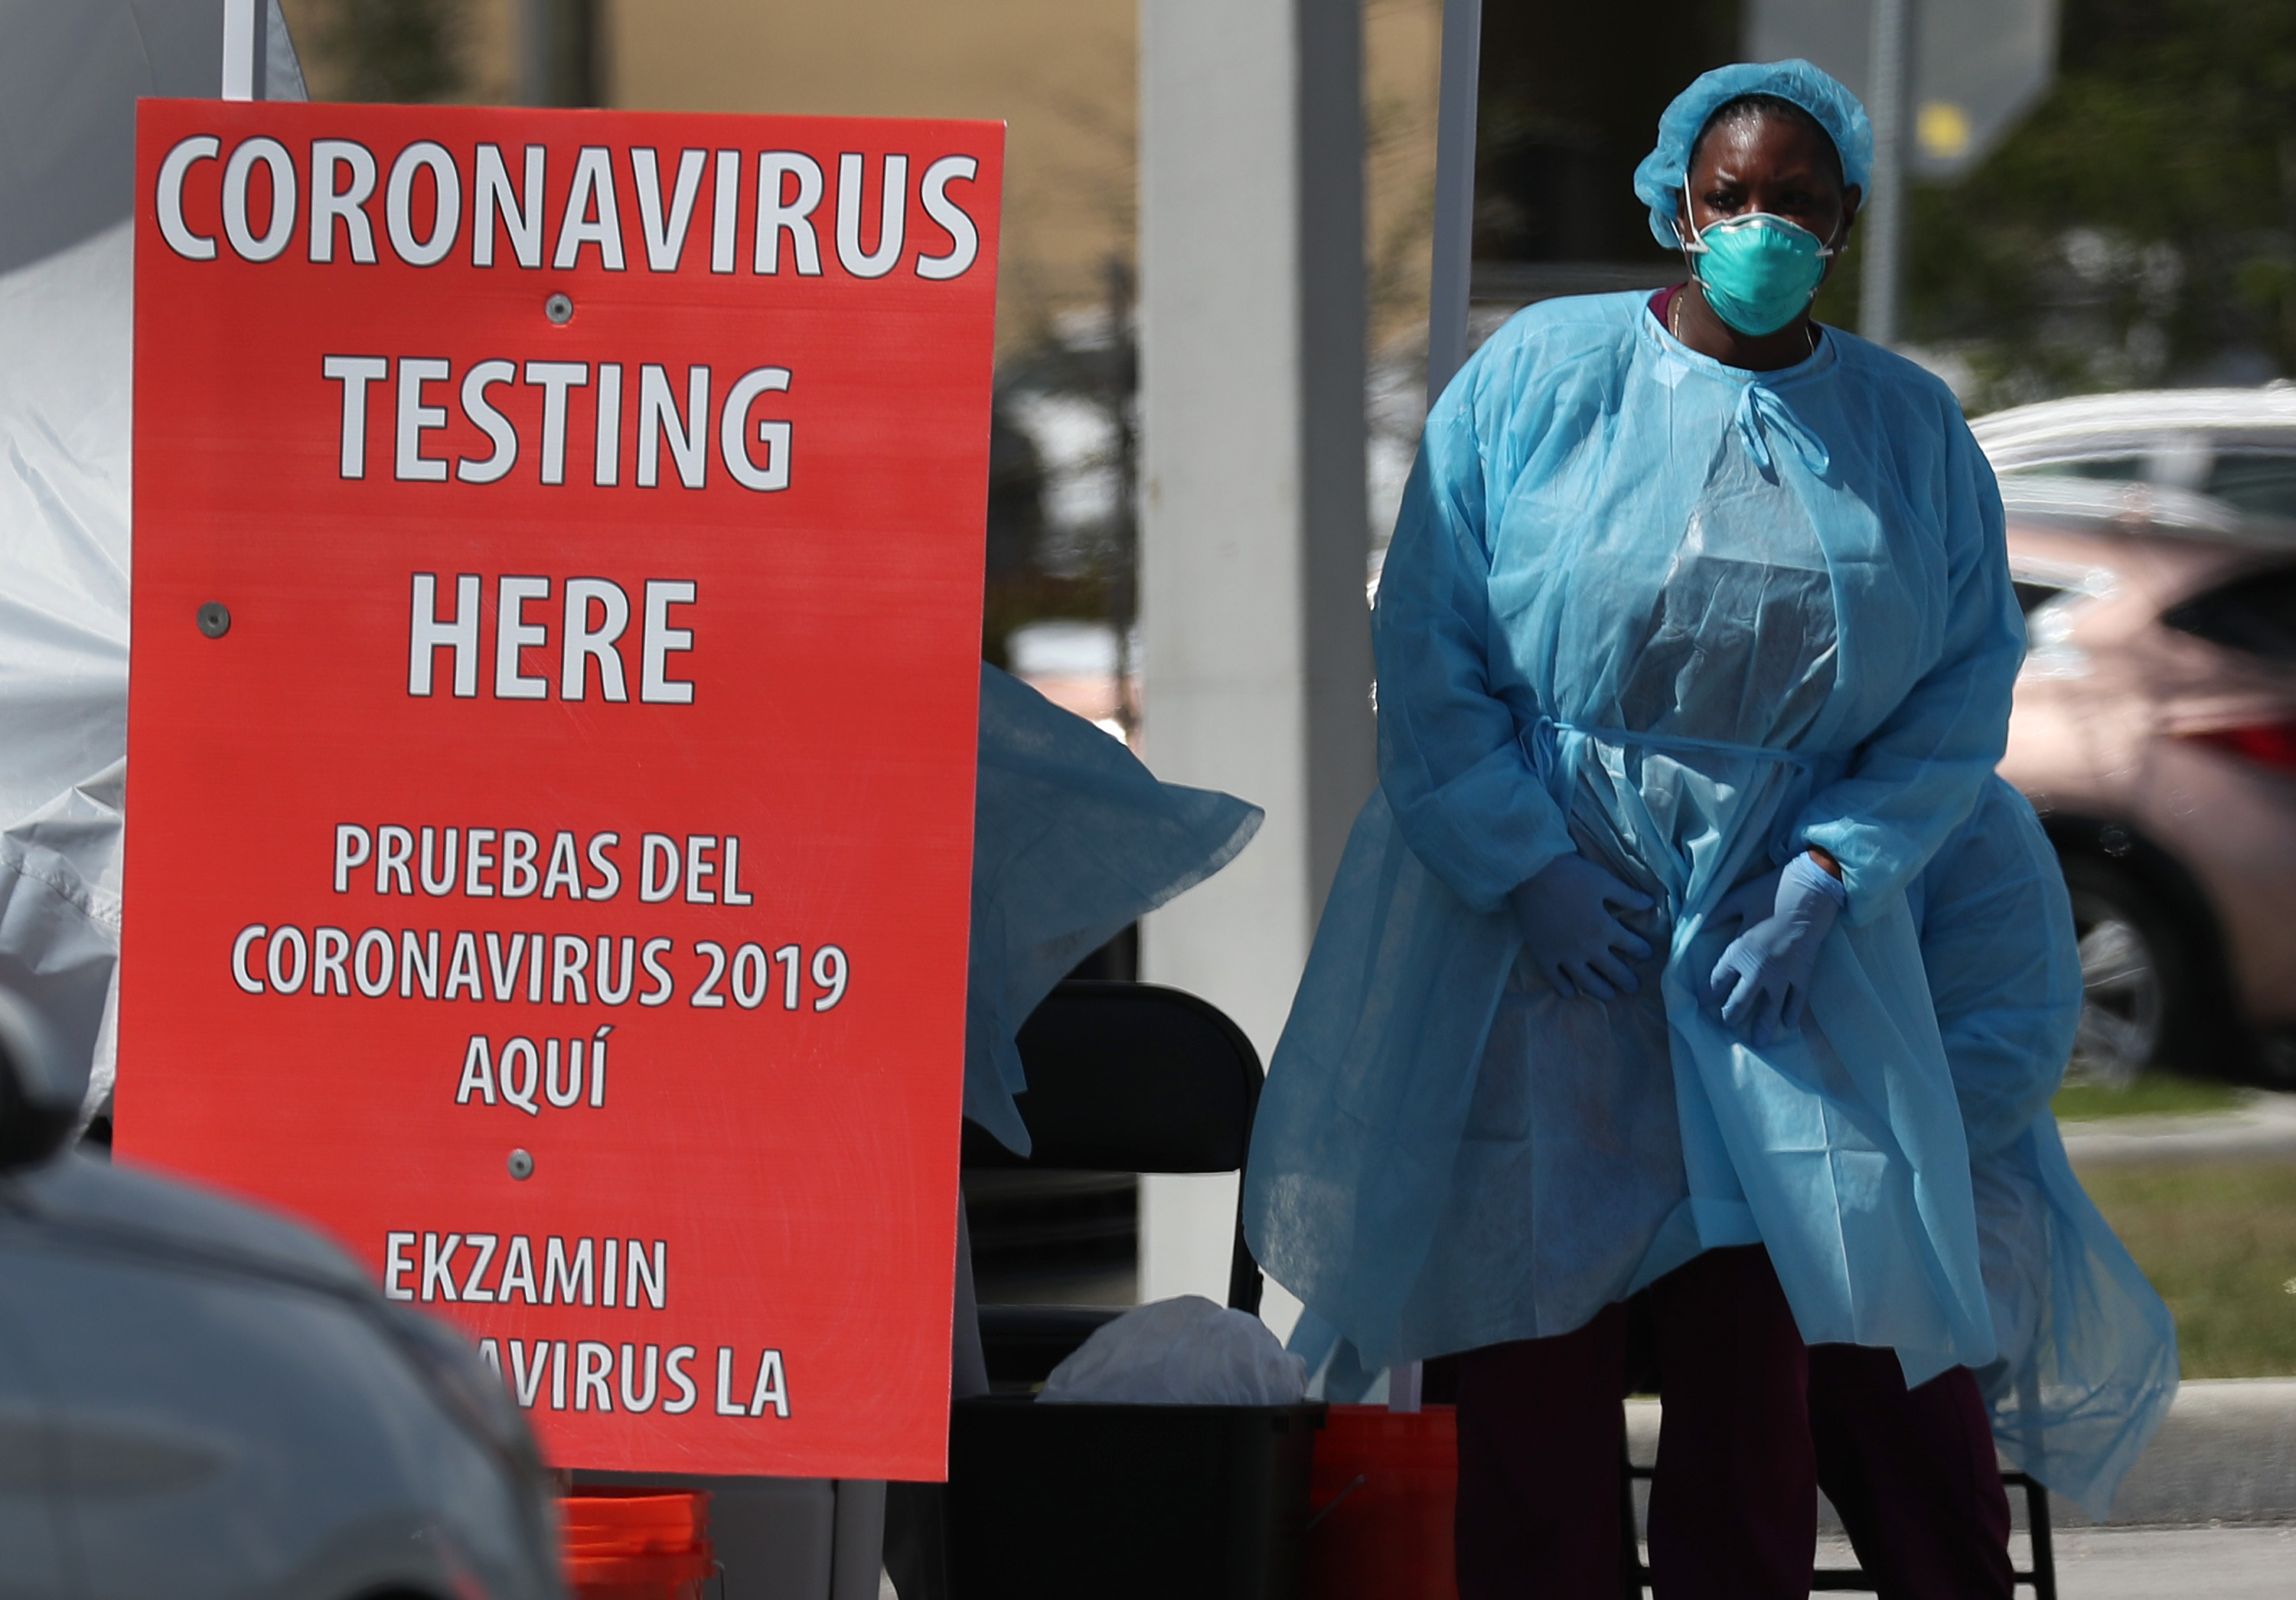 A member of the health care staff from the Community Health of South Florida, Inc. (CHI) prepares to test people for the coronavirus in the parking lot of its Doris Ison Health Center on March 18 in Miami, Florida. (Joe Raedle—Getty Images)